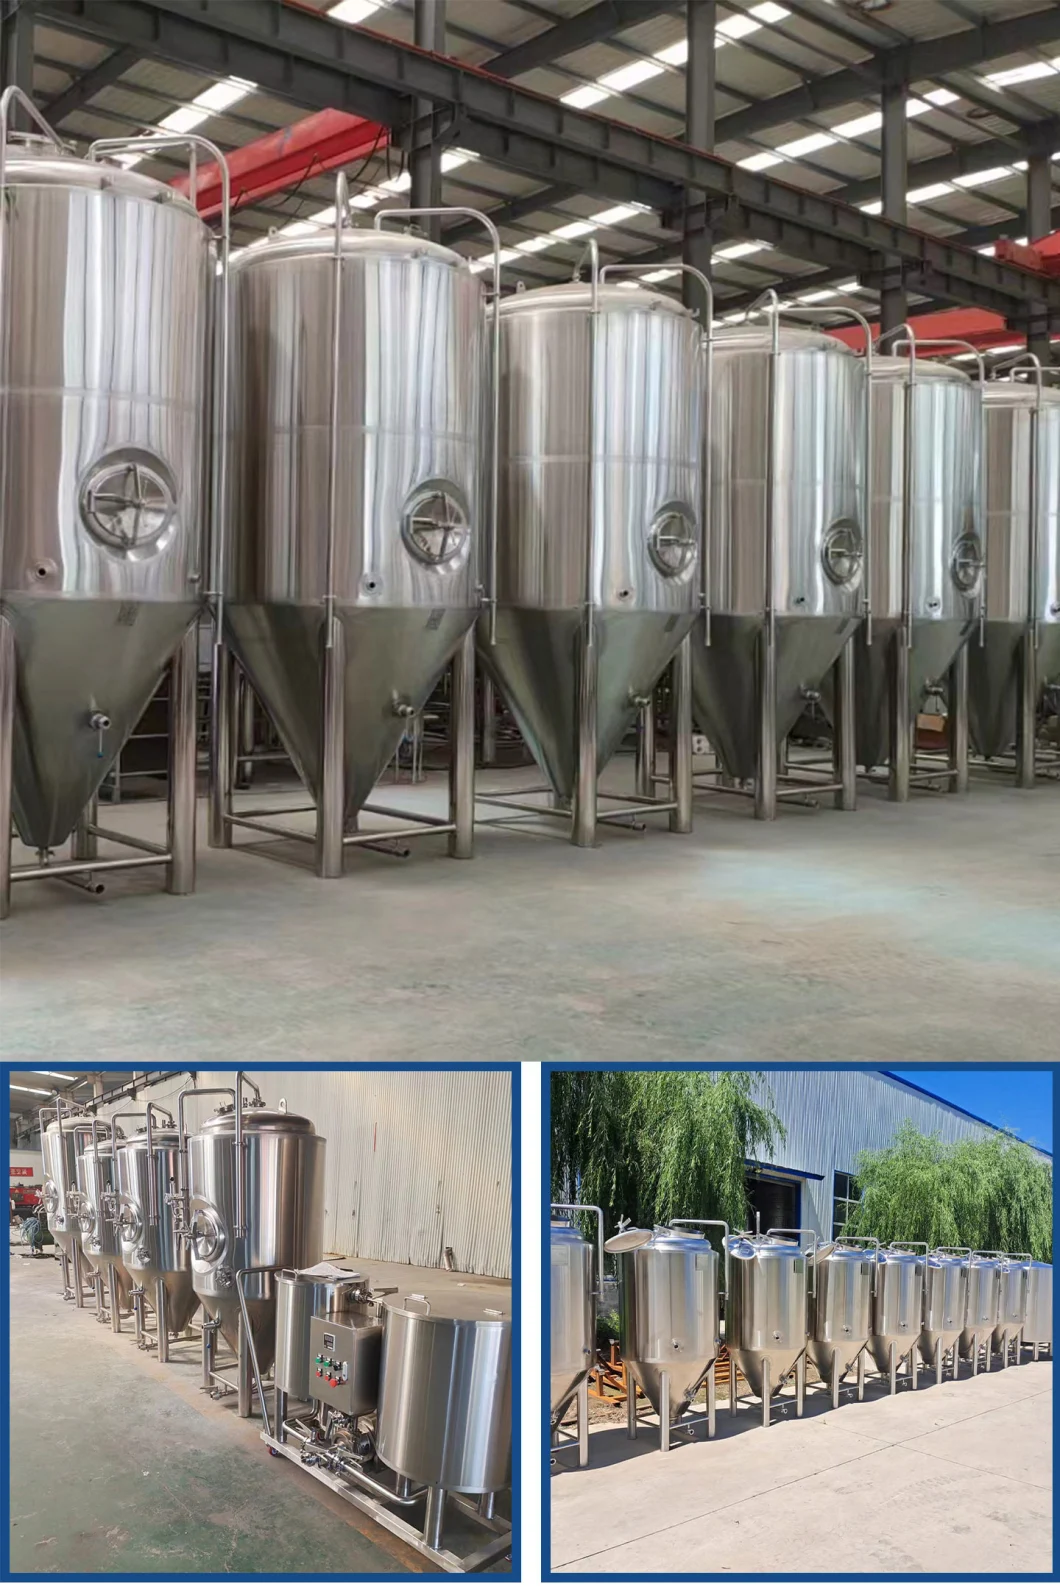 00L 200L 300L 500L 700L 1000L 1bbl 2bbl 3bbl 5bbl Industrial Commerical Restaurant Pub Home Micro Craft Brewery Brewing System Turnkey Beer Equipment